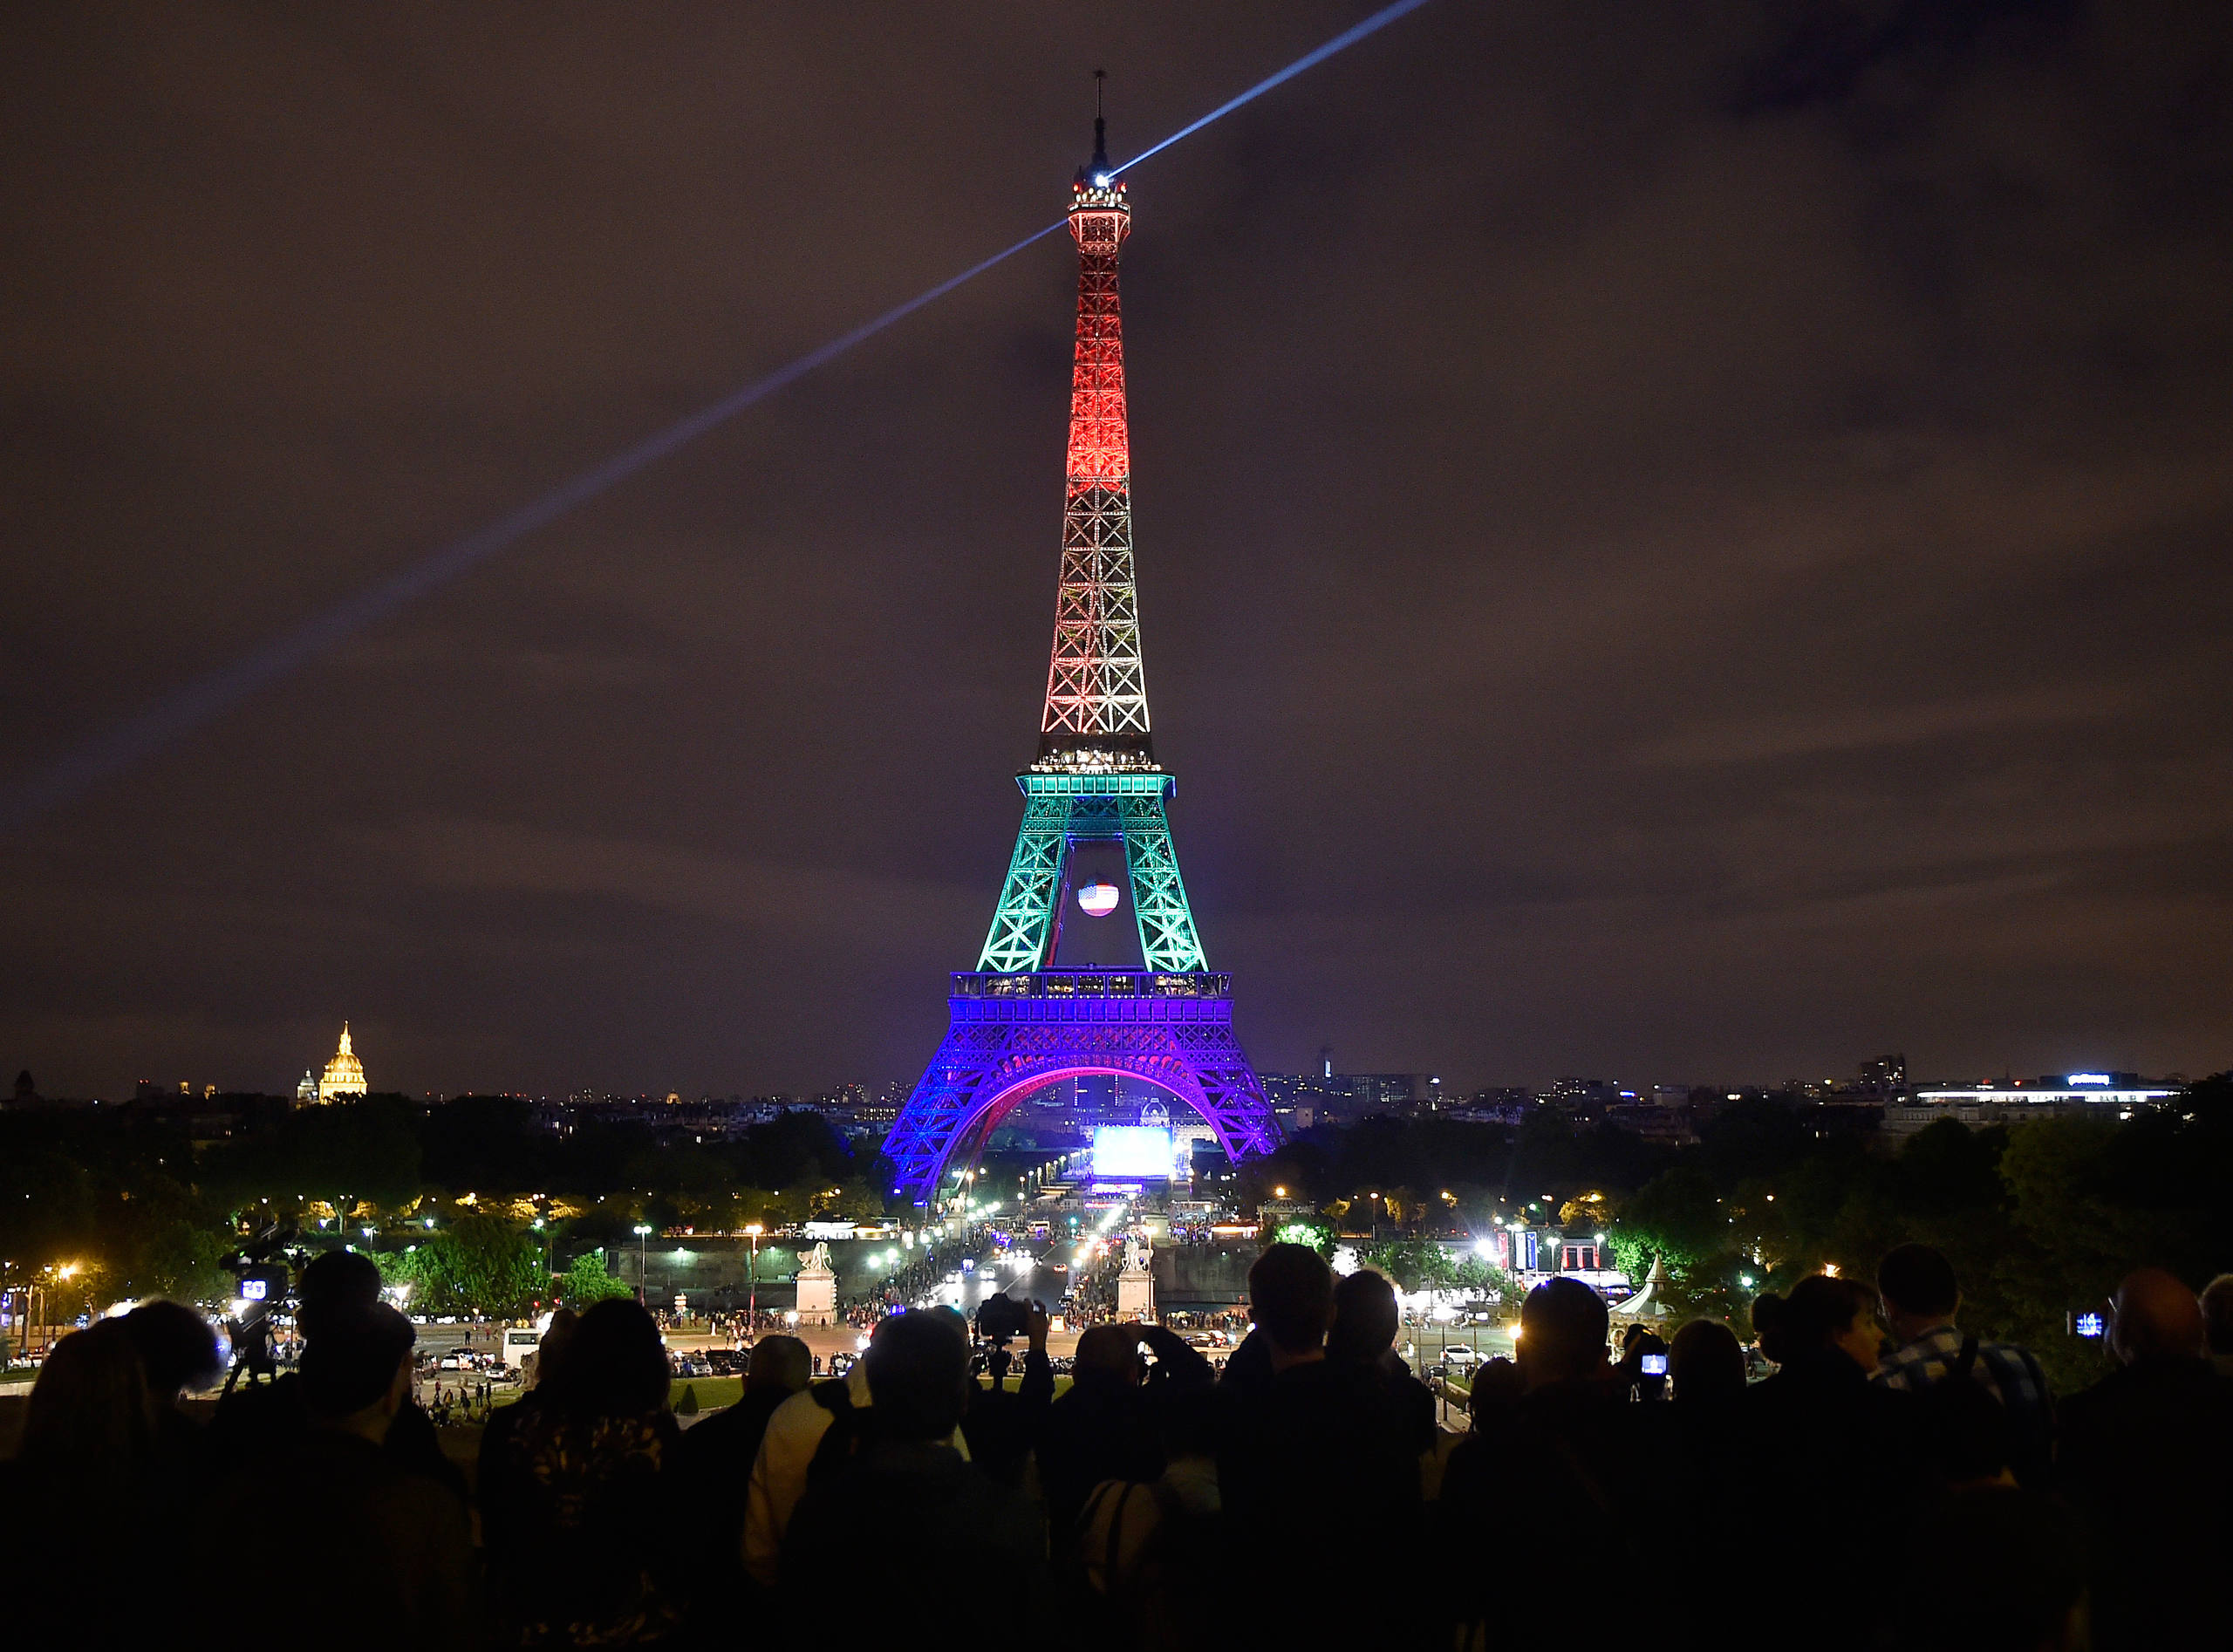 Orlando Shooting: See the Eiffel Tower Lit Up for Victims | Time